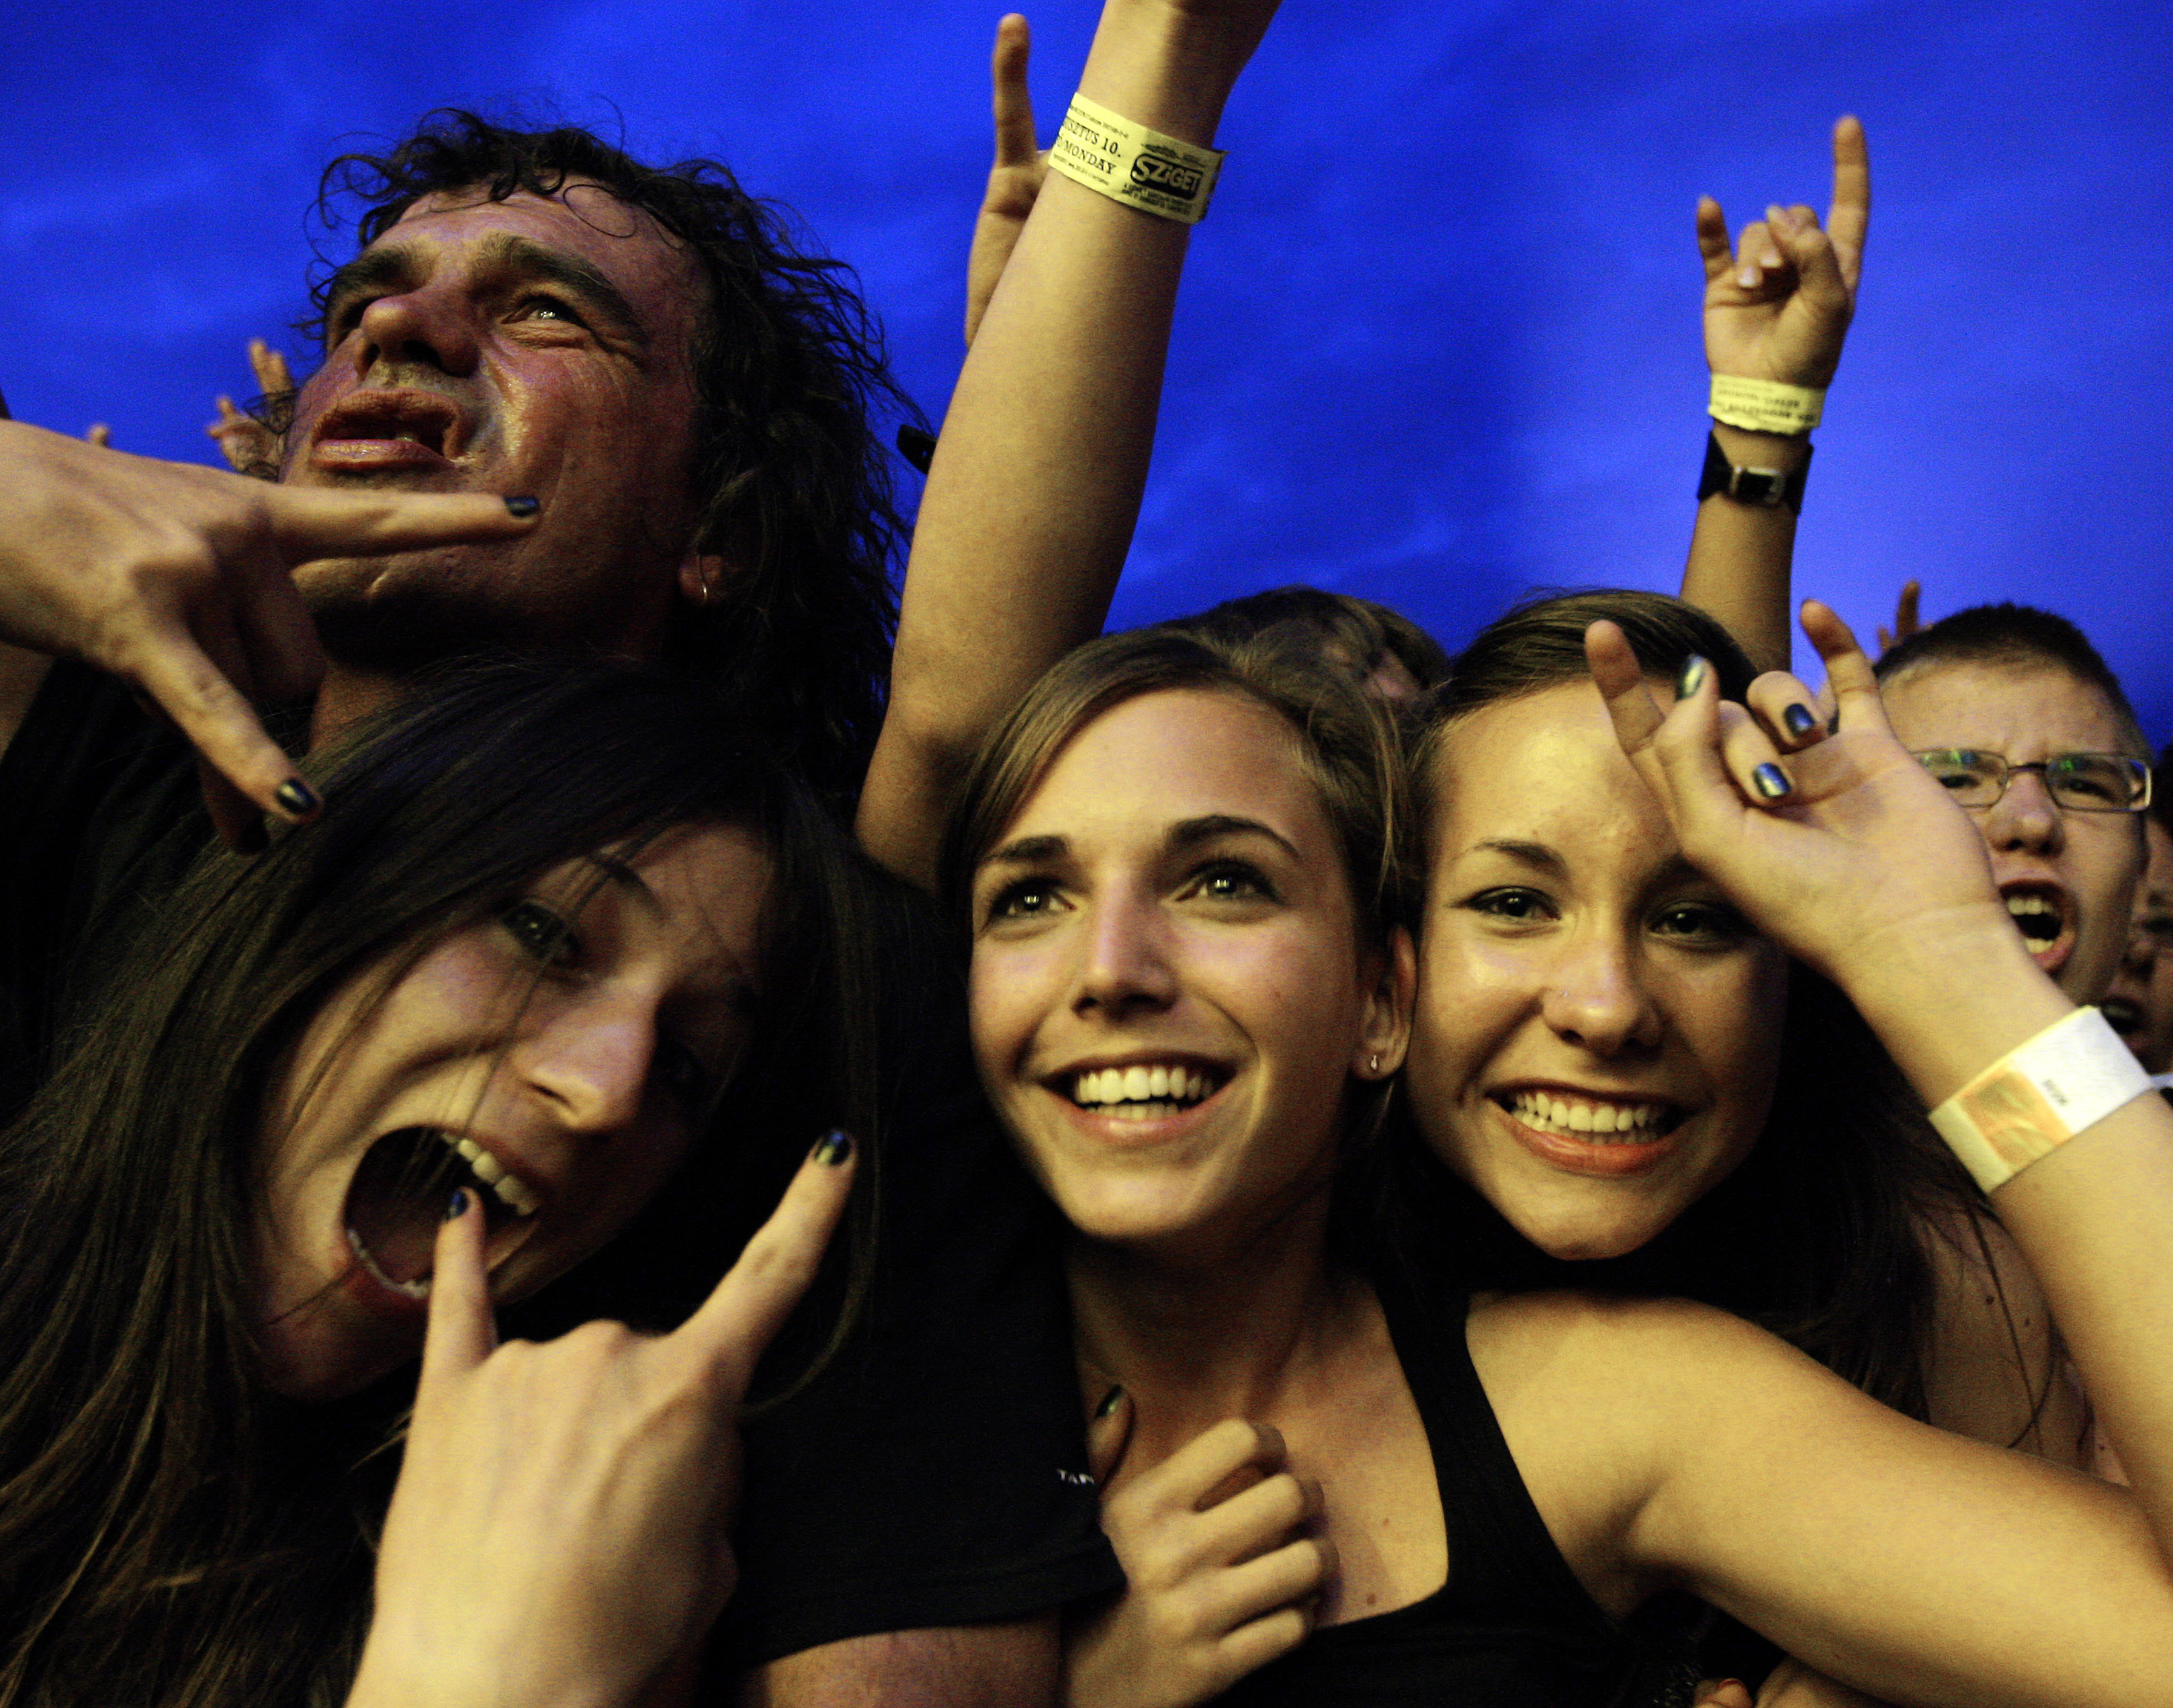 Revellers attend a concert by Hungarian metal band "Tankcsapda" during Budapest's one-week, round-the-clock Sziget ('Island') music festival on an island in the Danube river August 10, 2009. (© Laszlo Balogh / Reuters—REUTERS)